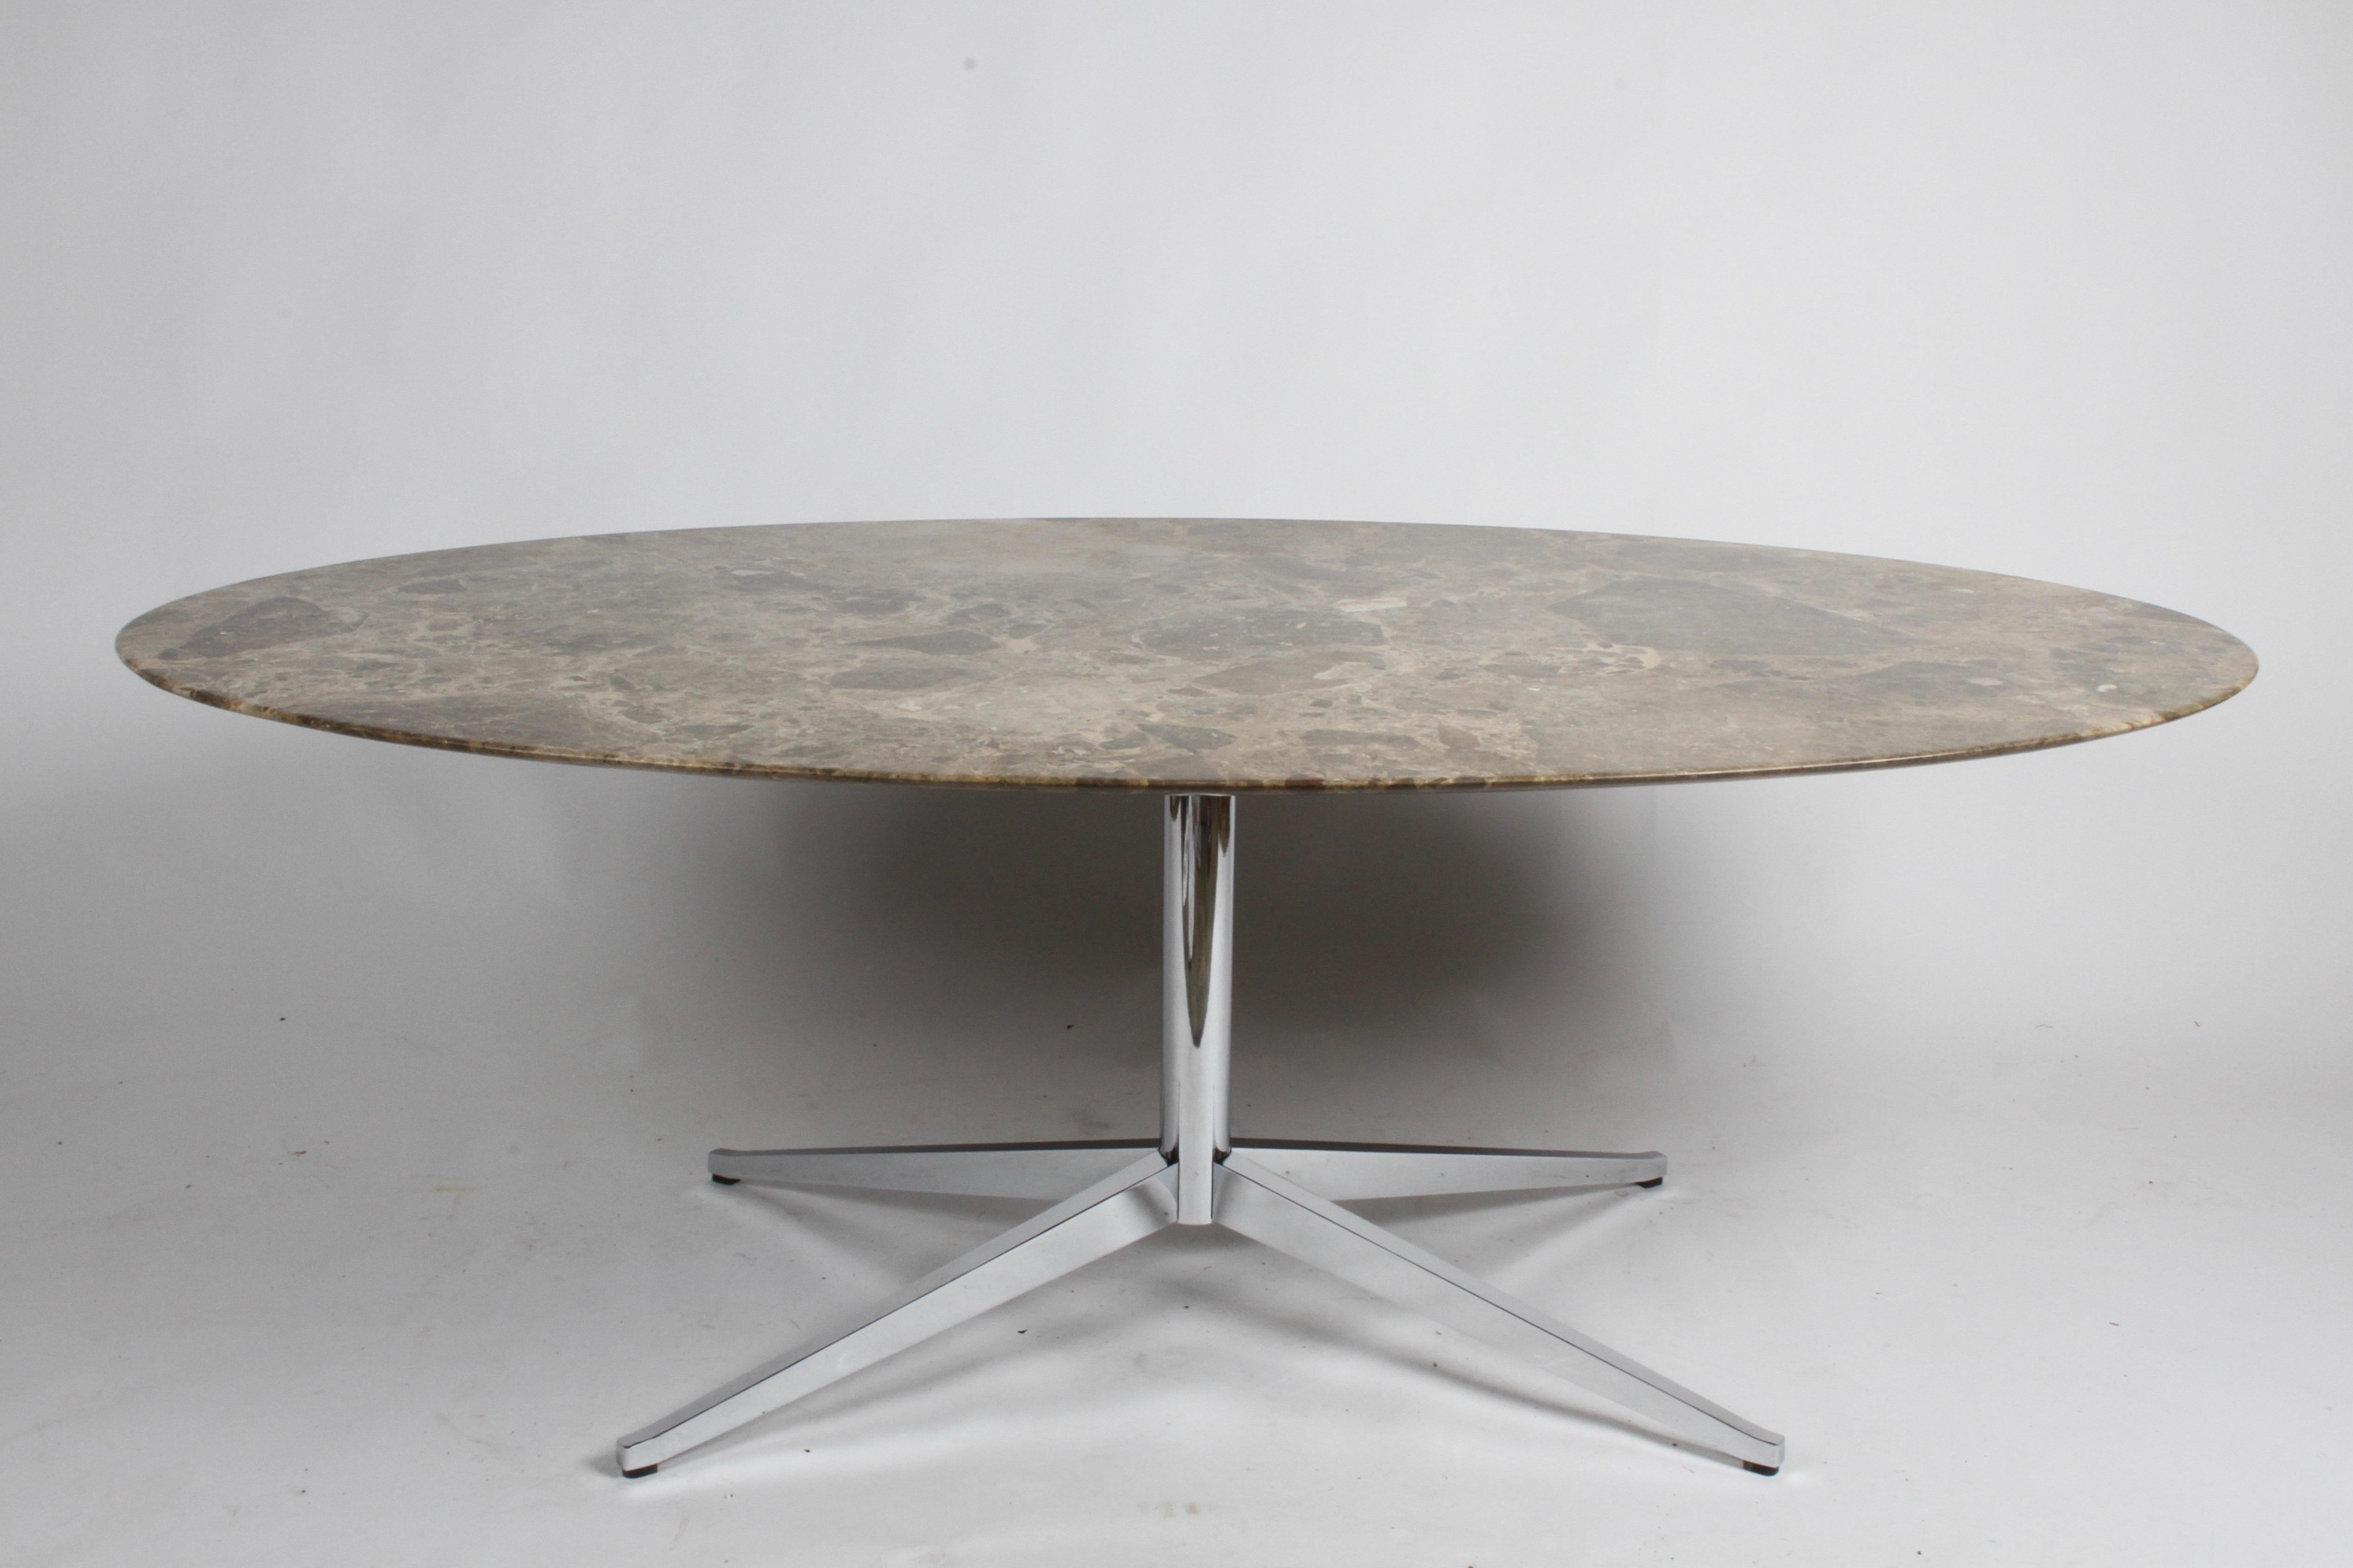 Classic Florence Knoll for Knoll dining table with oval Emperador marble top and chrome base. Emperador marble top colors are olive-beige tones, the marble is quarried in Spain. Chrome base legs have been newly polished and re-chromed. Table had a